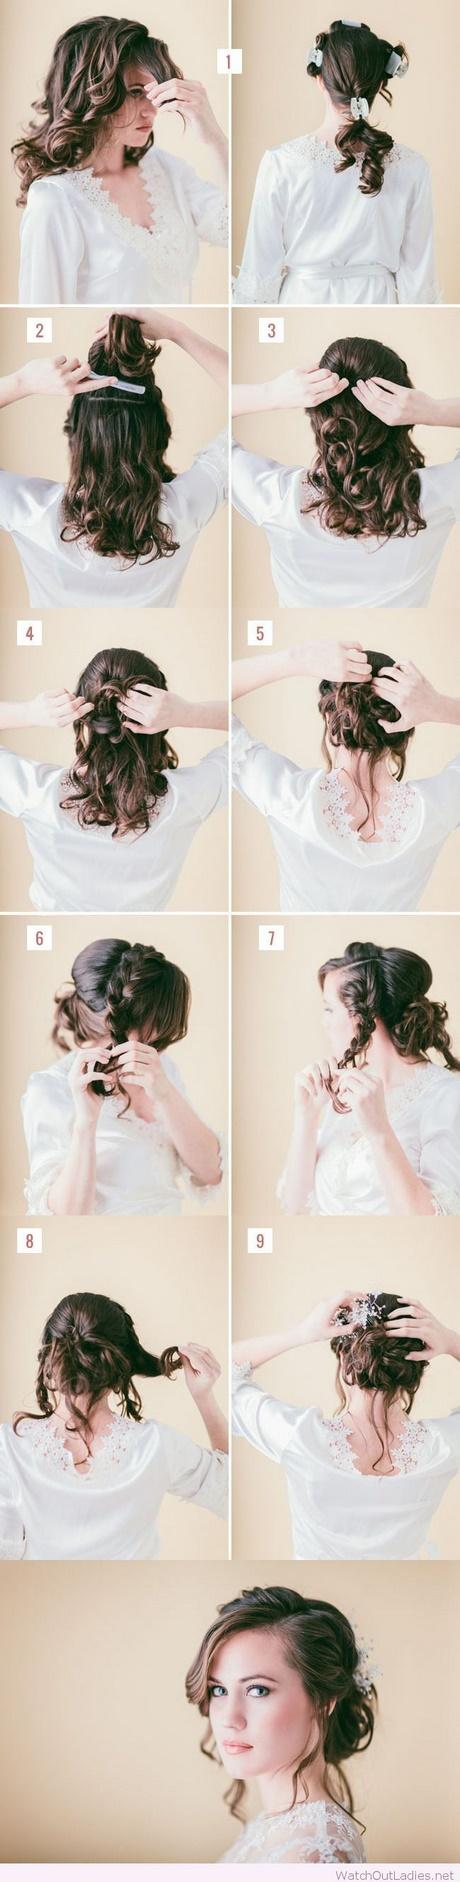 Easy updo hairstyles for weddings easy-updo-hairstyles-for-weddings-51_11